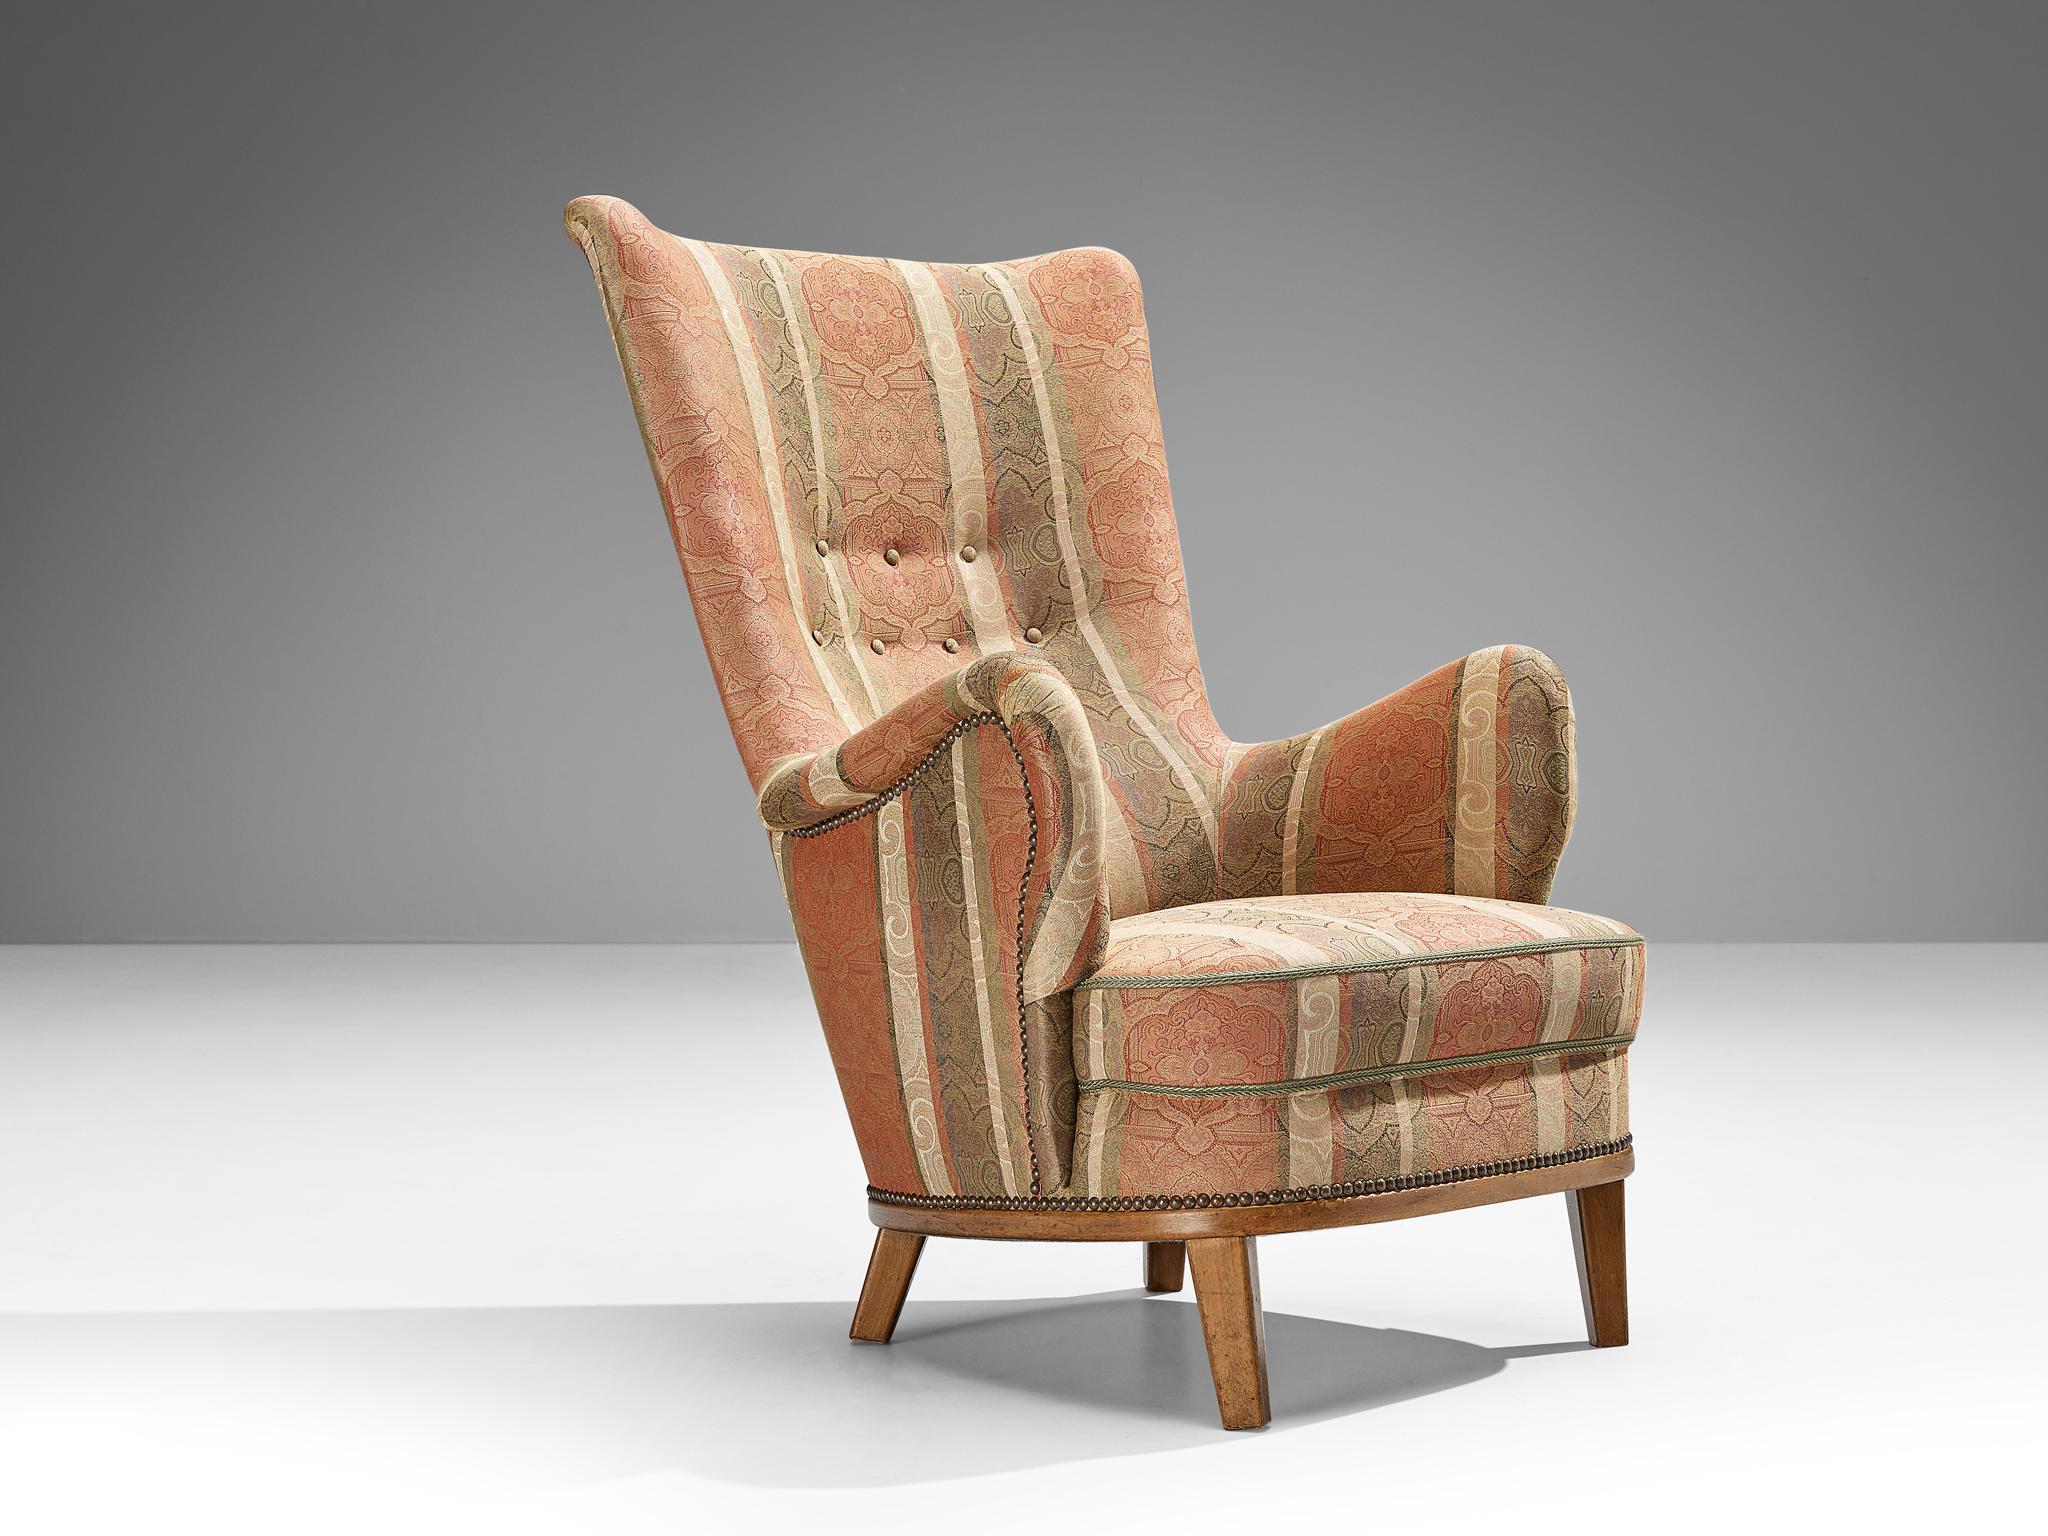 Mid-20th Century Charming Danish Easy Chair in Patterned Upholstery For Sale